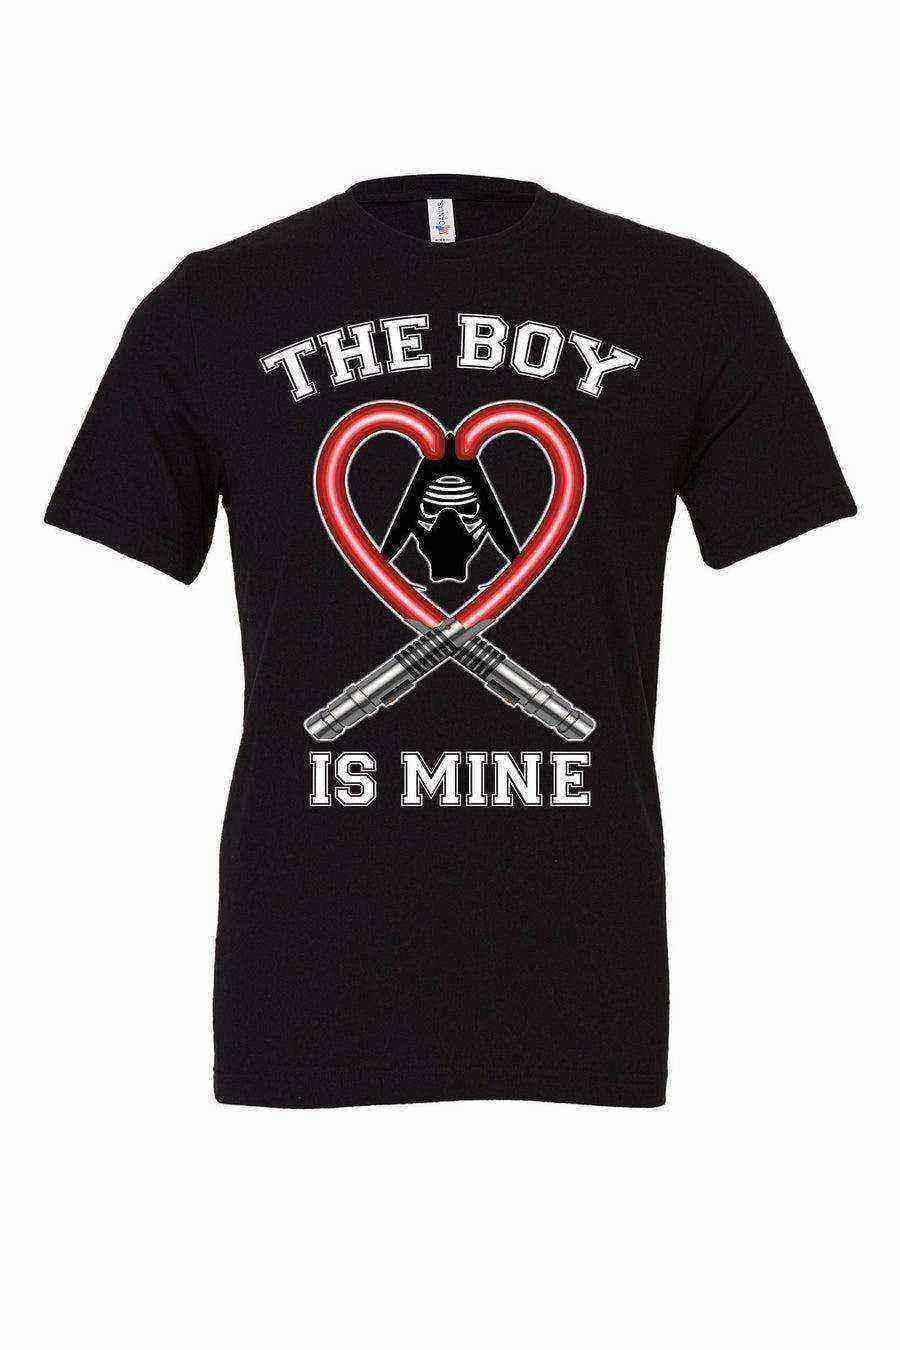 Youth | Kylo Ren Is My Boyfriend Shirt | The Boy Is Mine Shirt - Dylan's Tees